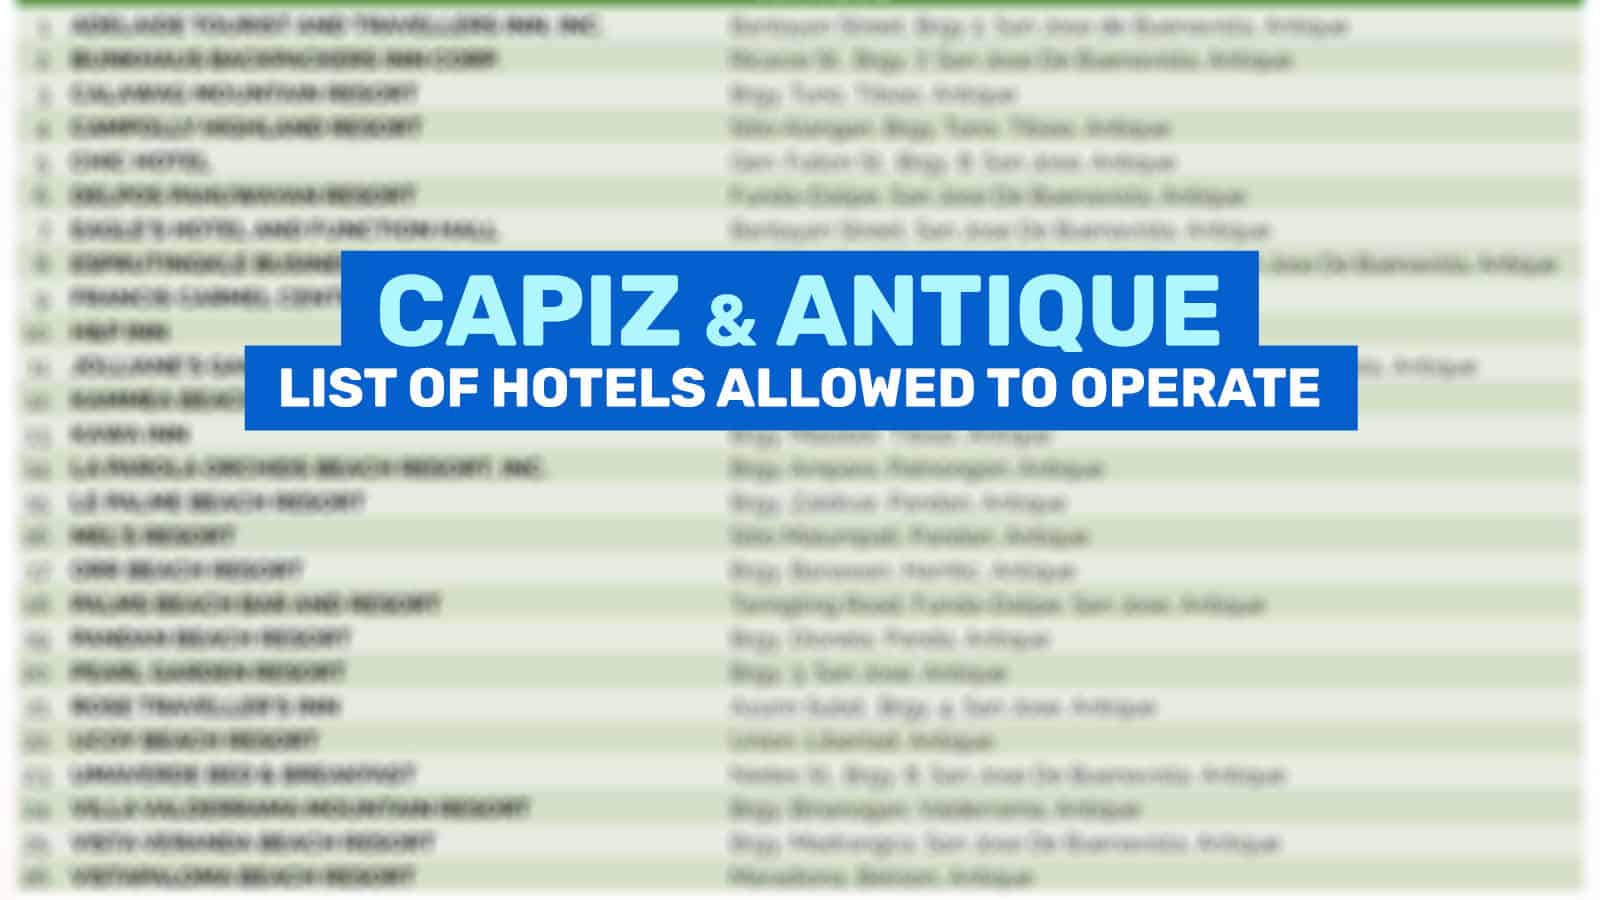 ANTIQUE & CAPIZ: List of Hotels & Resorts Allowed to Operate